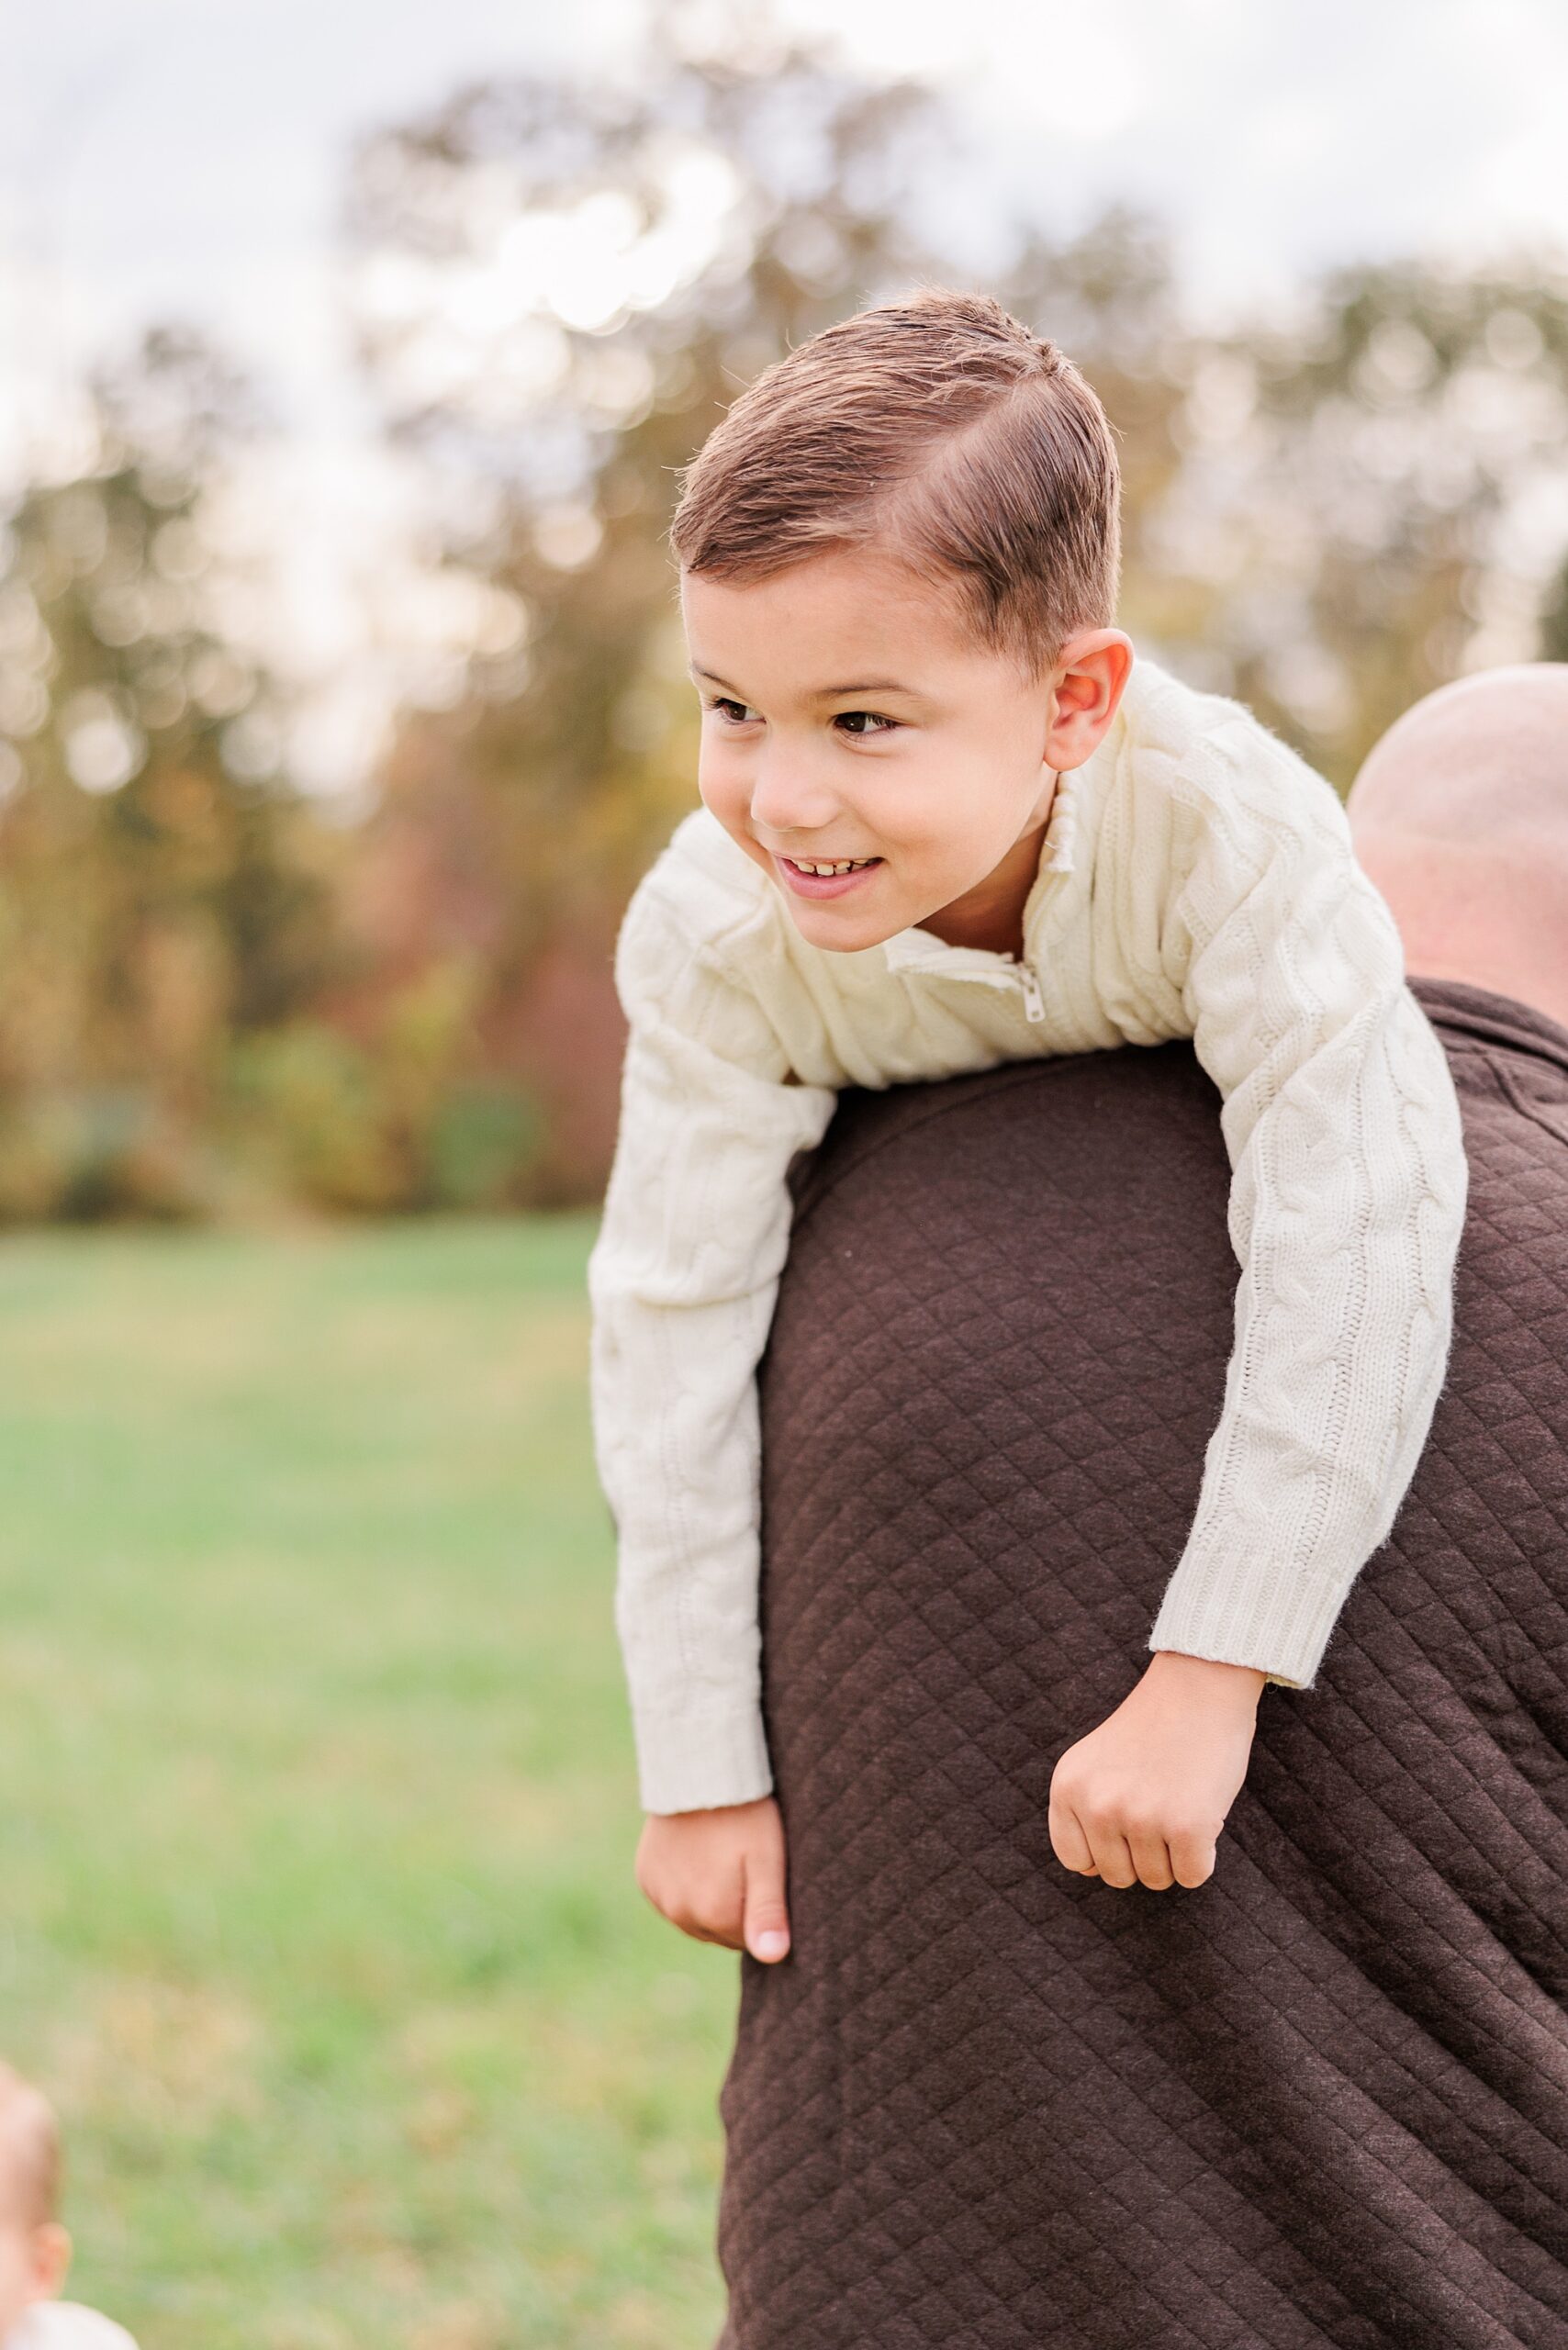 Tips to create natural and effortless family photos from Northern Virginia Family Photographer Christina Tundo Photography